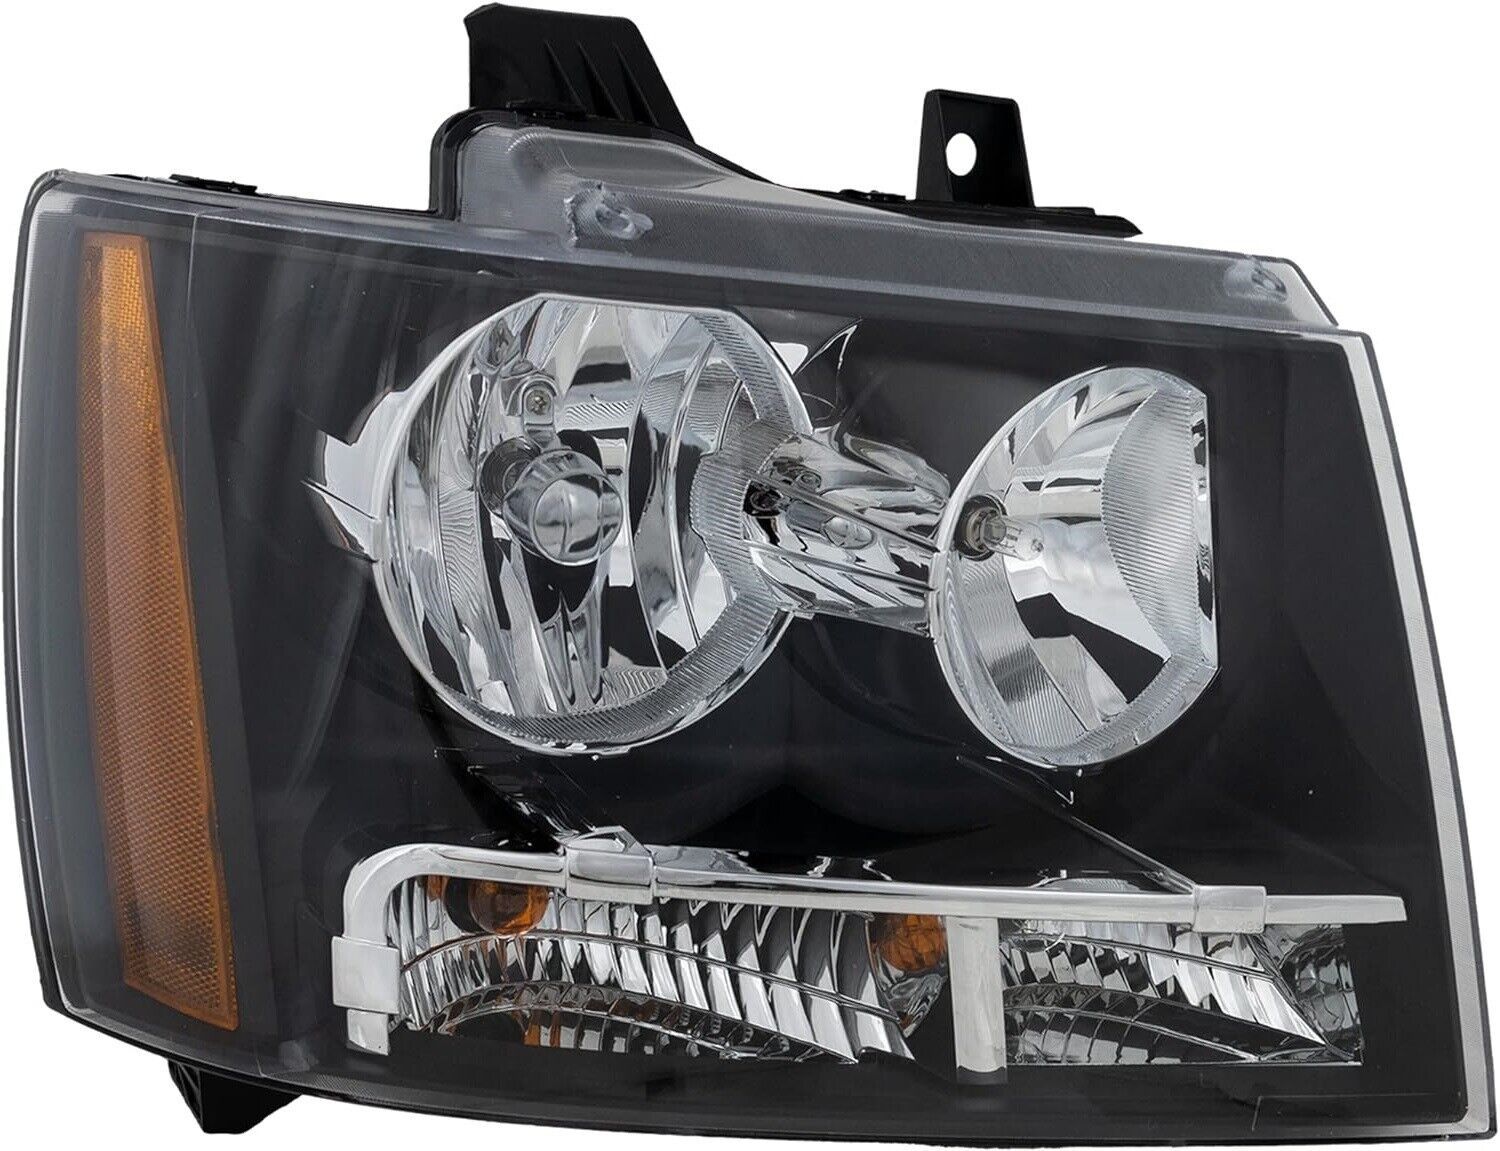 Primary image for FOUR WINDS WINDSPORT 2013 2014 2015 LEFT  DRIVER HEADLIGHT HEAD LIGHT LAMP RV